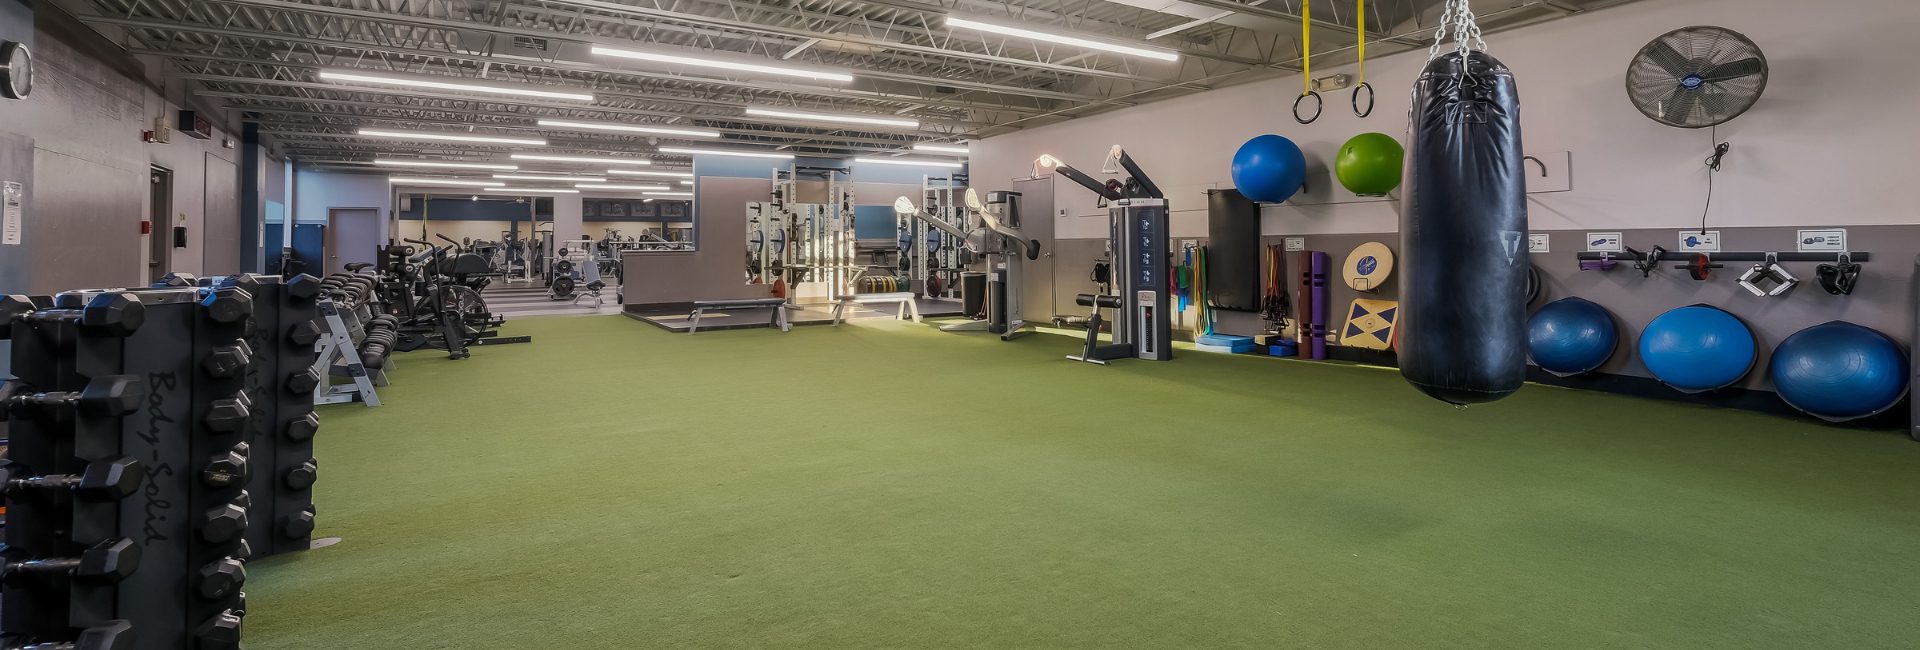 a functional training area at cornerstone club near me